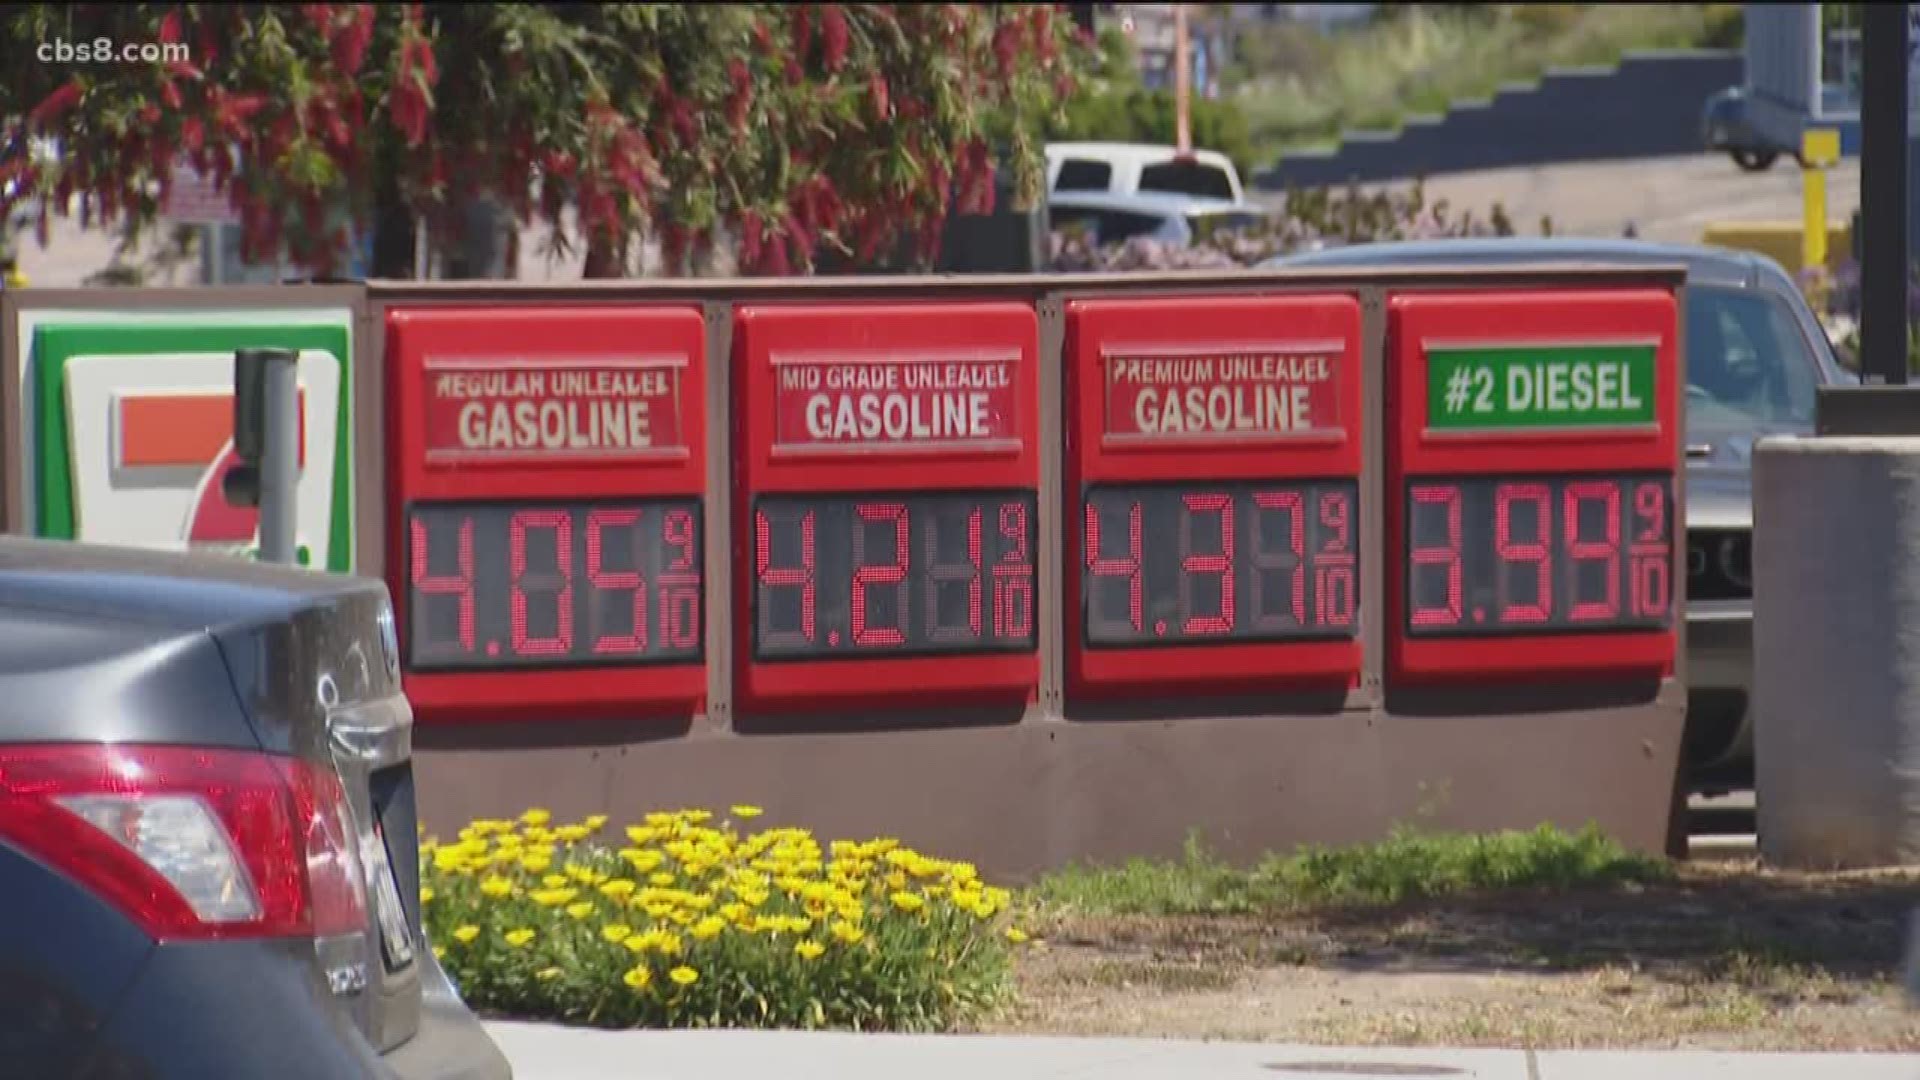 Many San Diegans feeling what seems like punishment at the pump as prices for fuel soar well above $4.